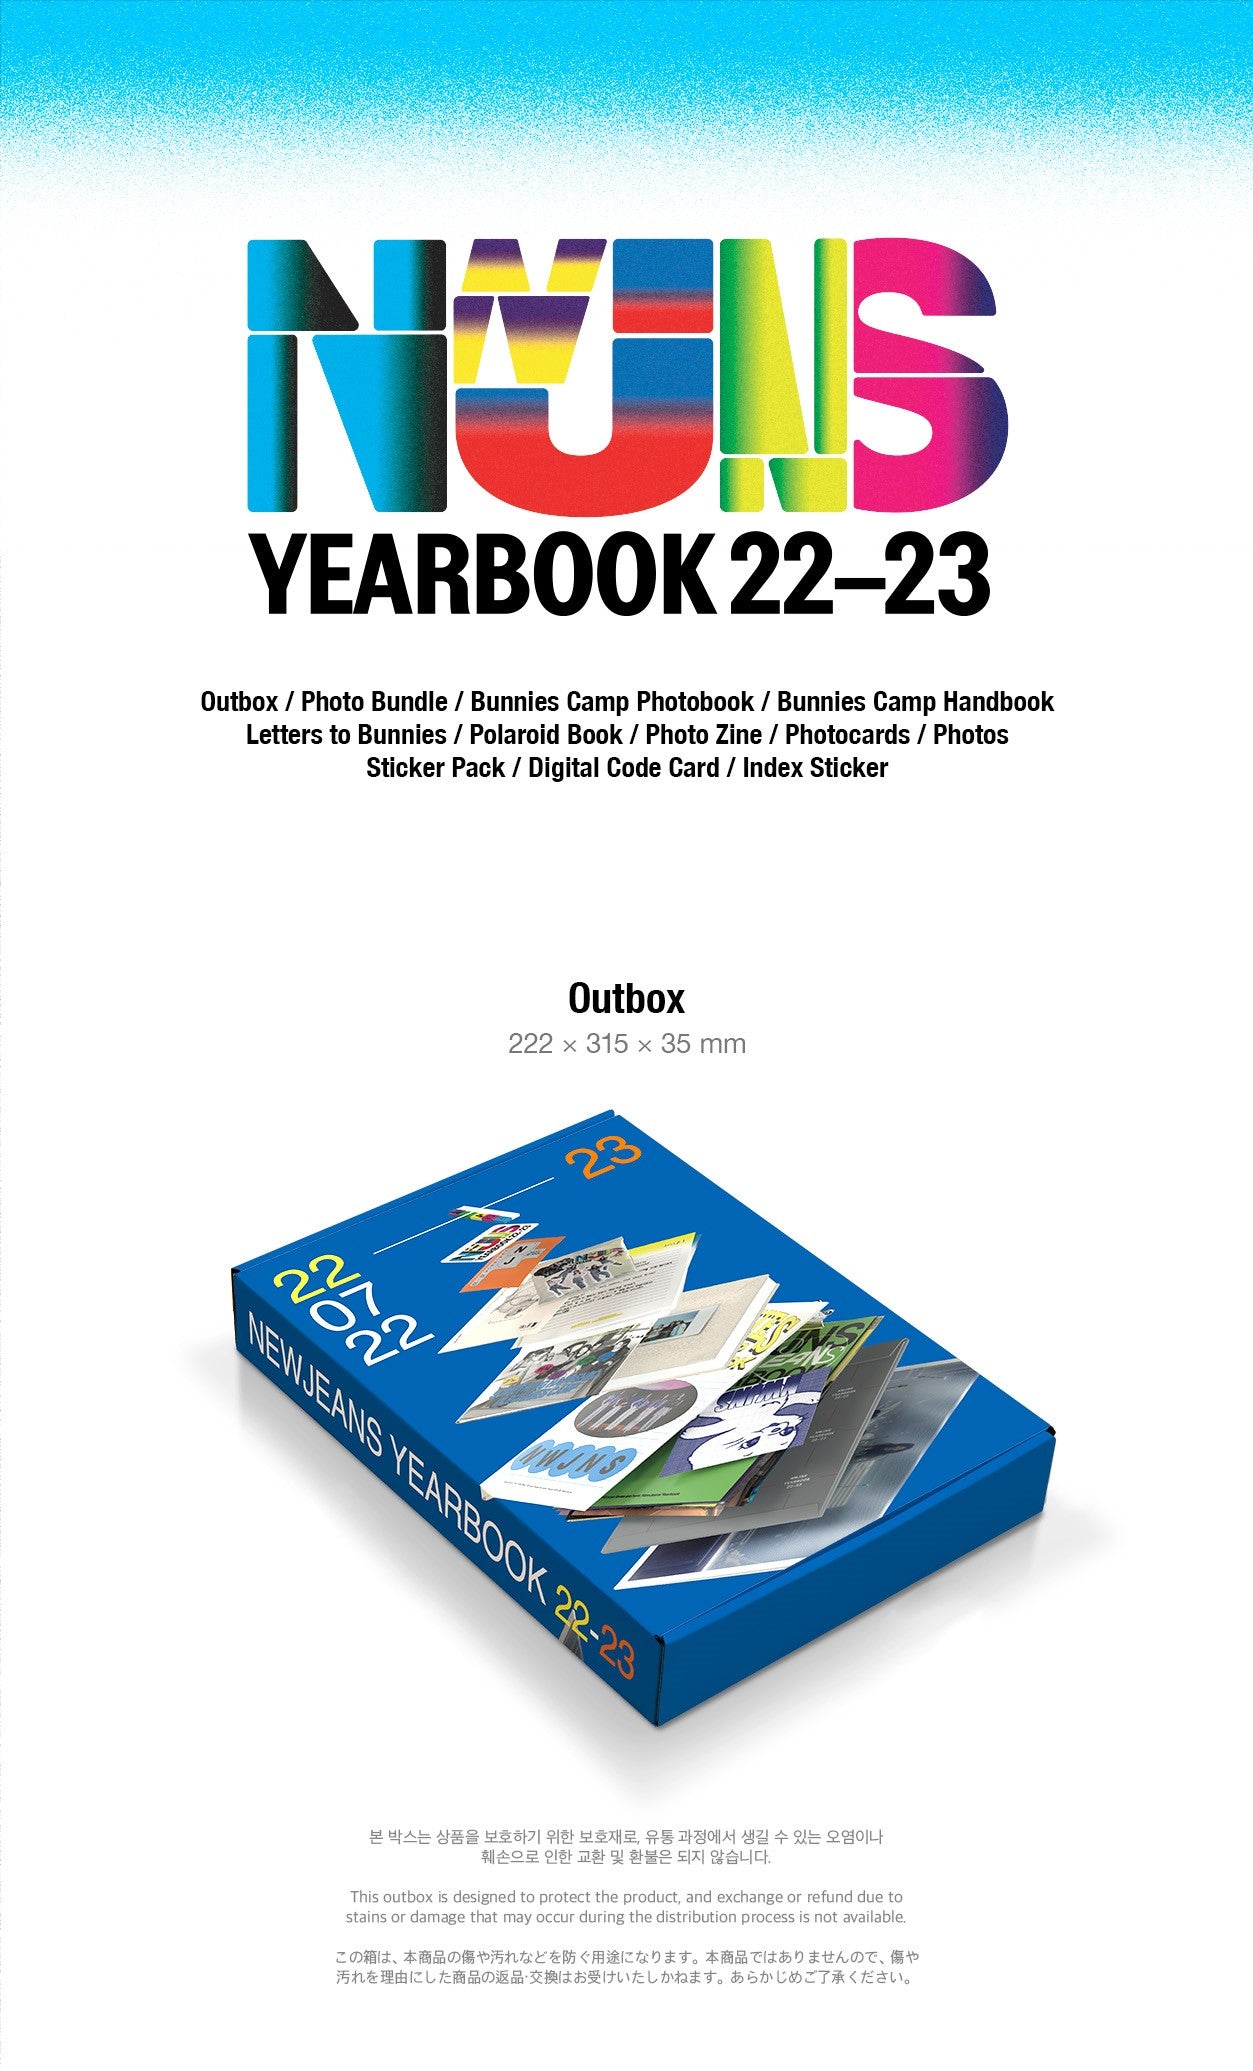 NewJeans - 'YEARBOOK 22-23'